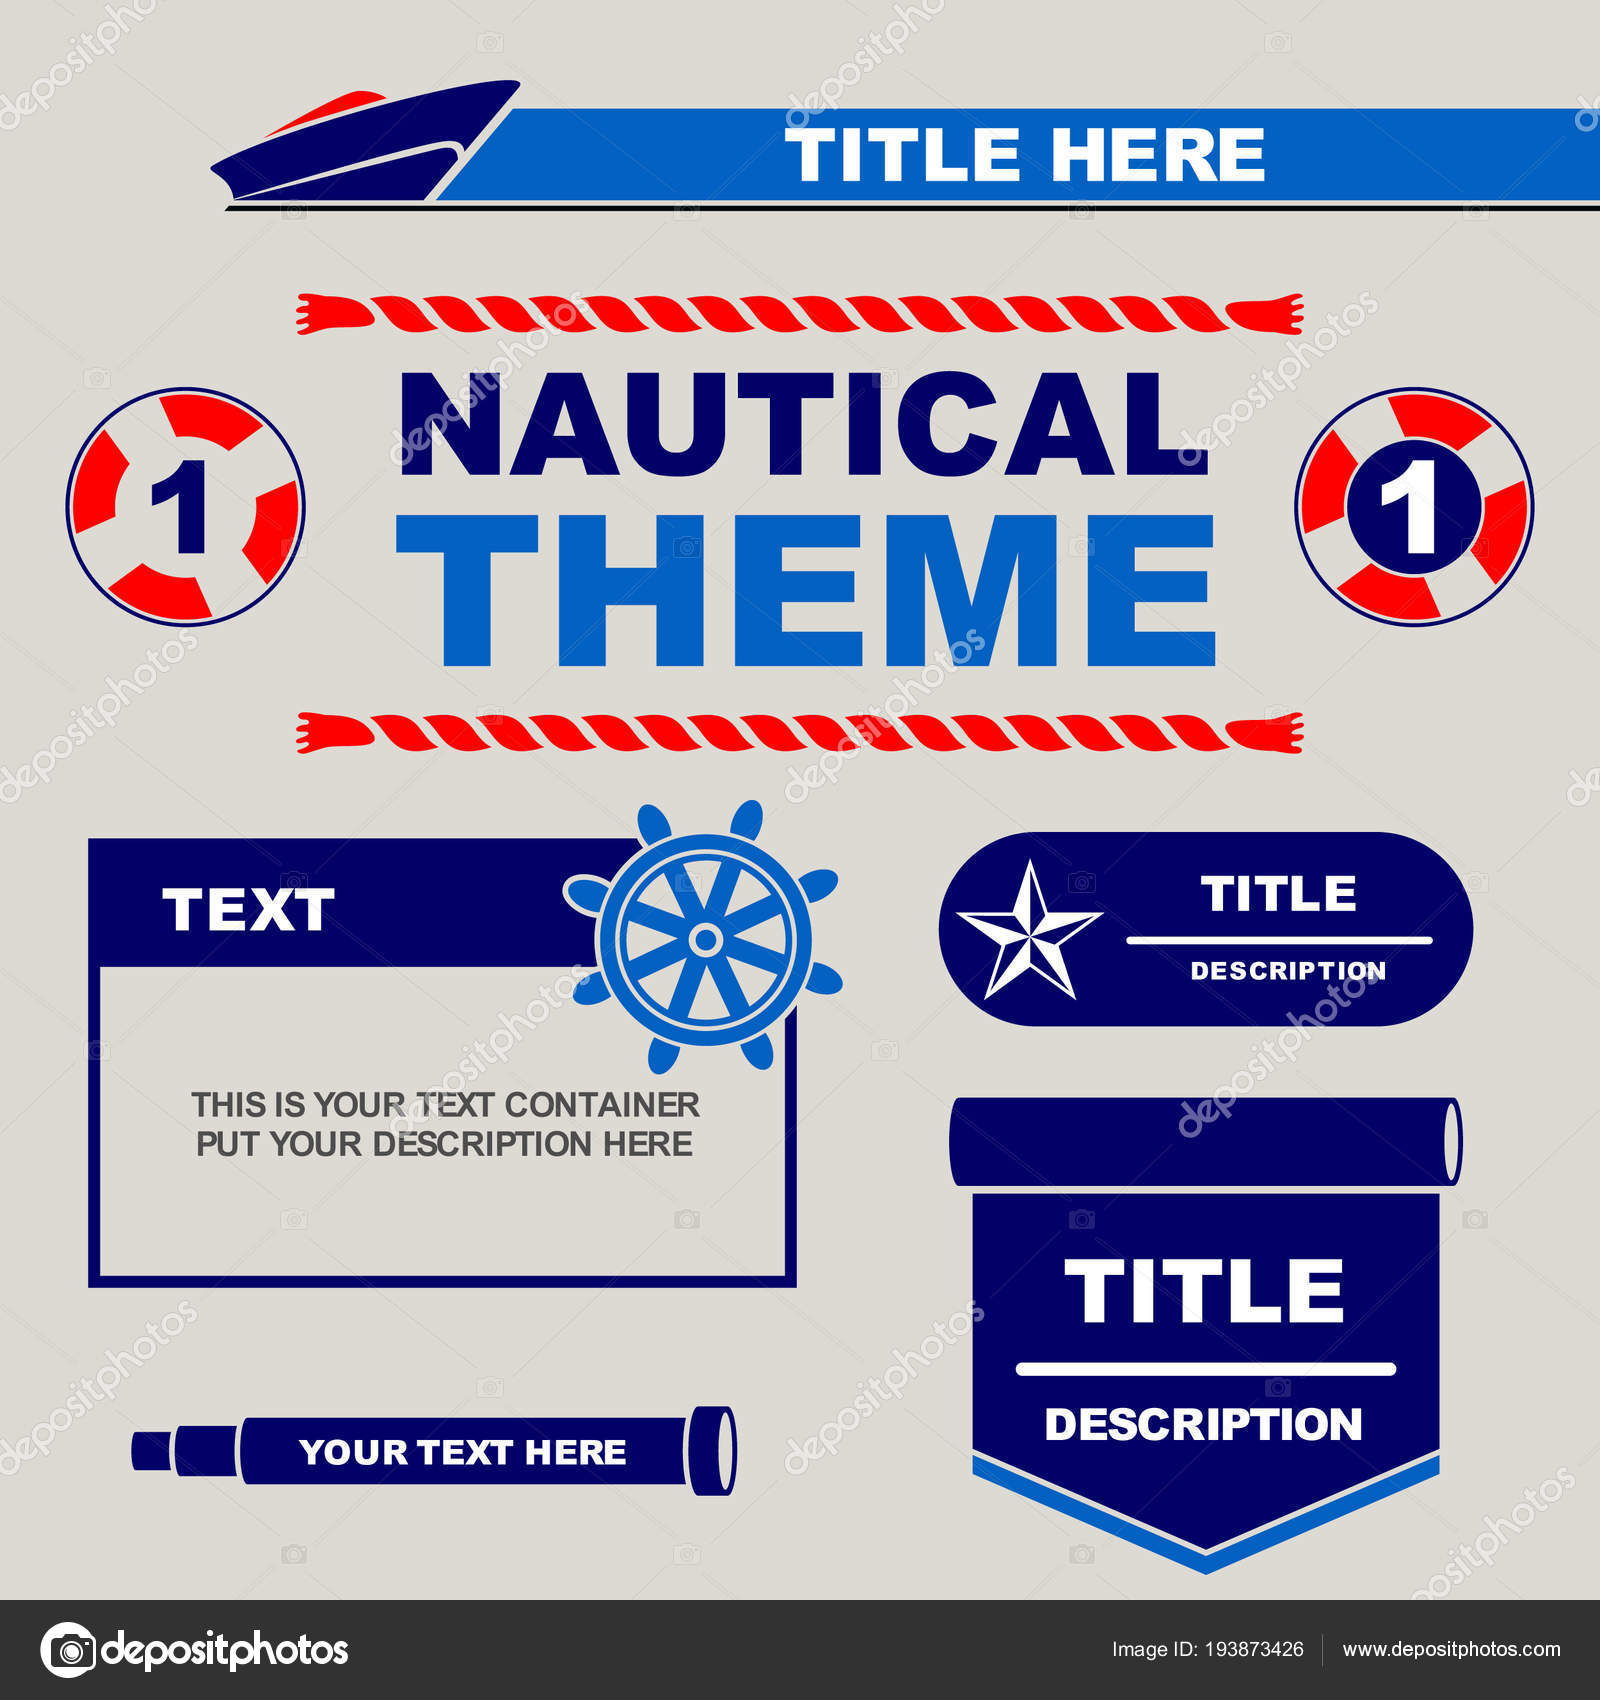 Nautical Theme Design Template You Can Use Flyers Banner For Nautical Banner Template